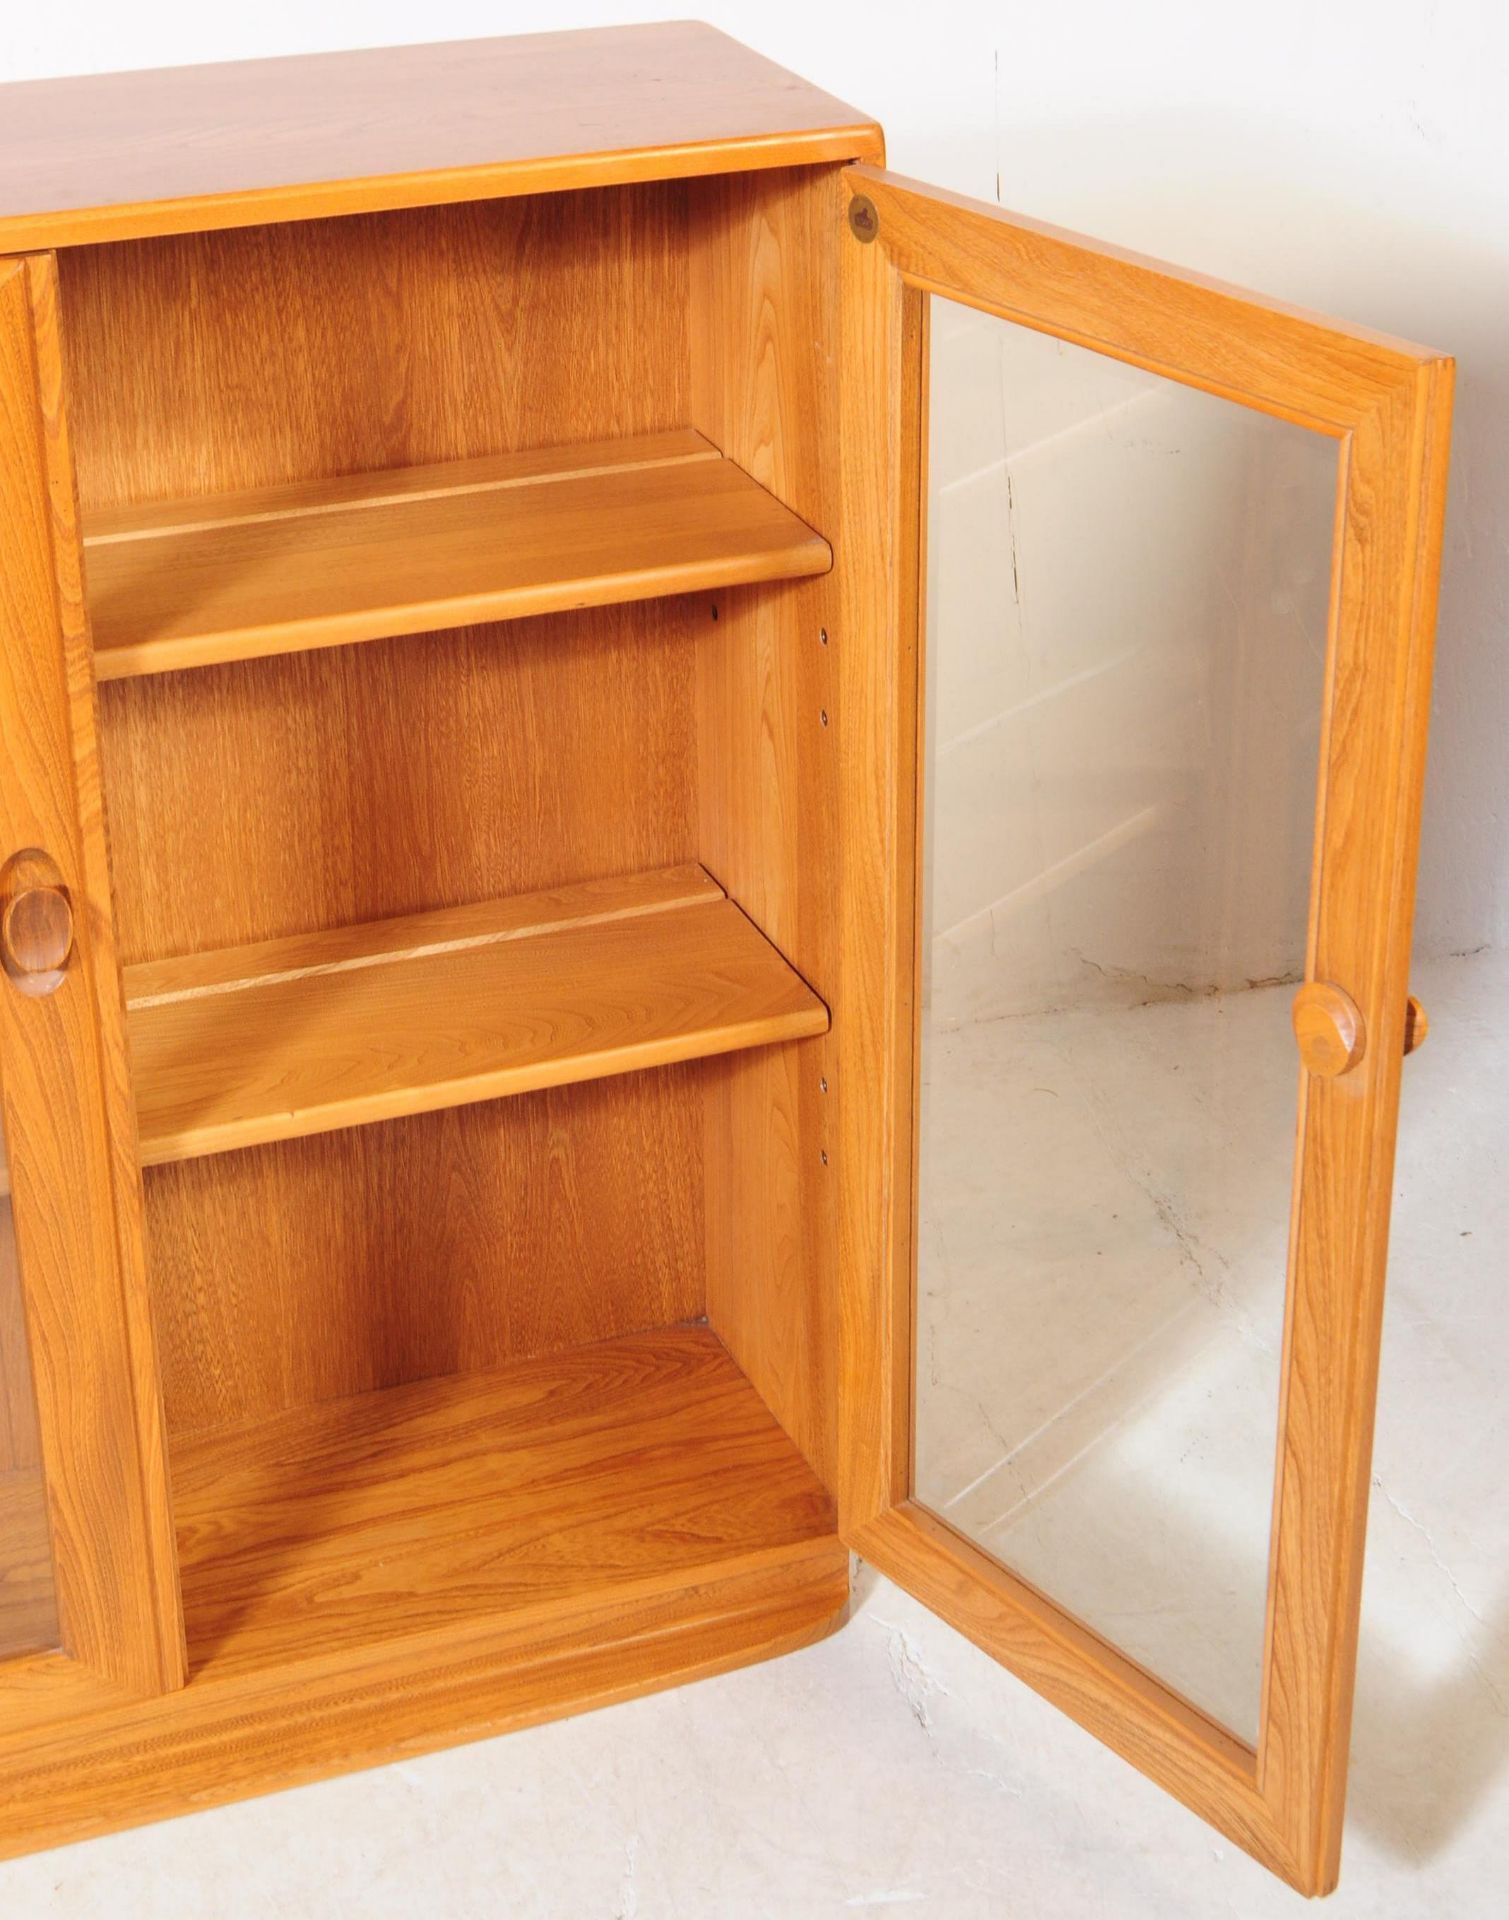 ERCOL - MODEL 810 - GOLDEN DAWN DISPLAY CABINET - Image 3 of 6